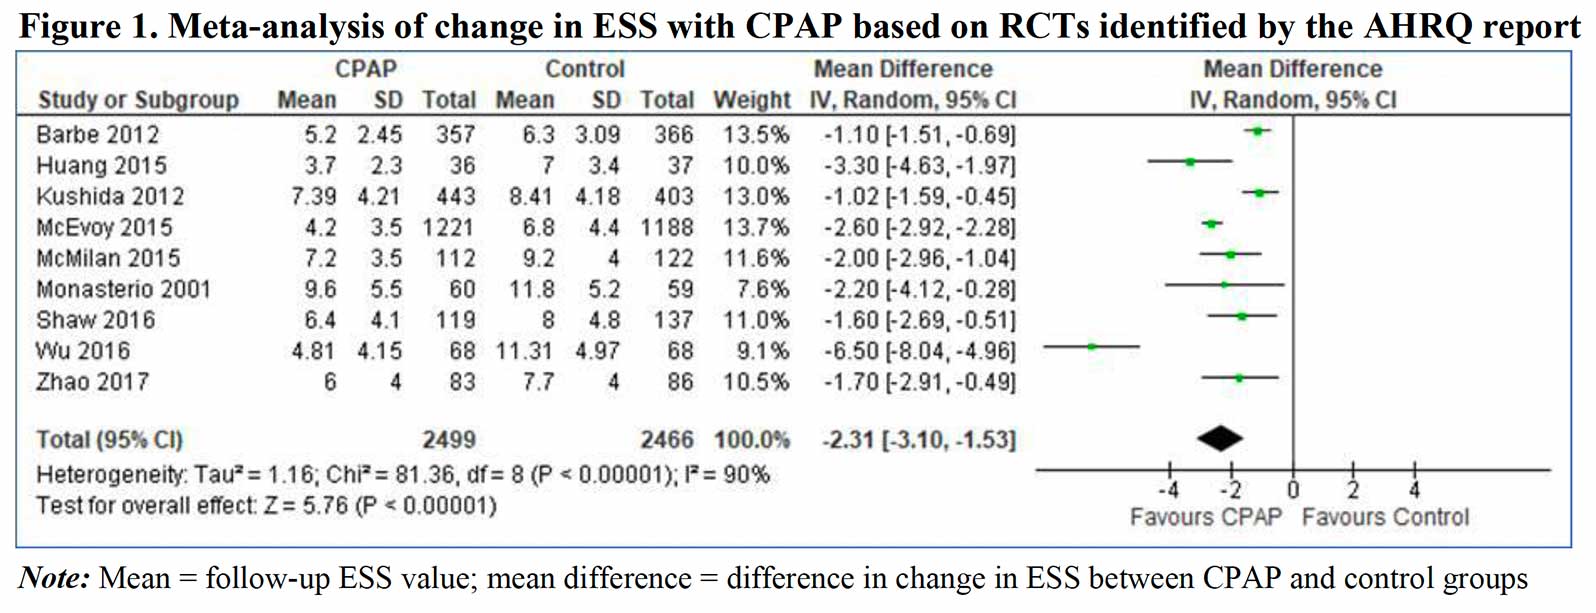 Meta-analysis of change in ESS with CPAP based on RCTs identified by the AHRQ report